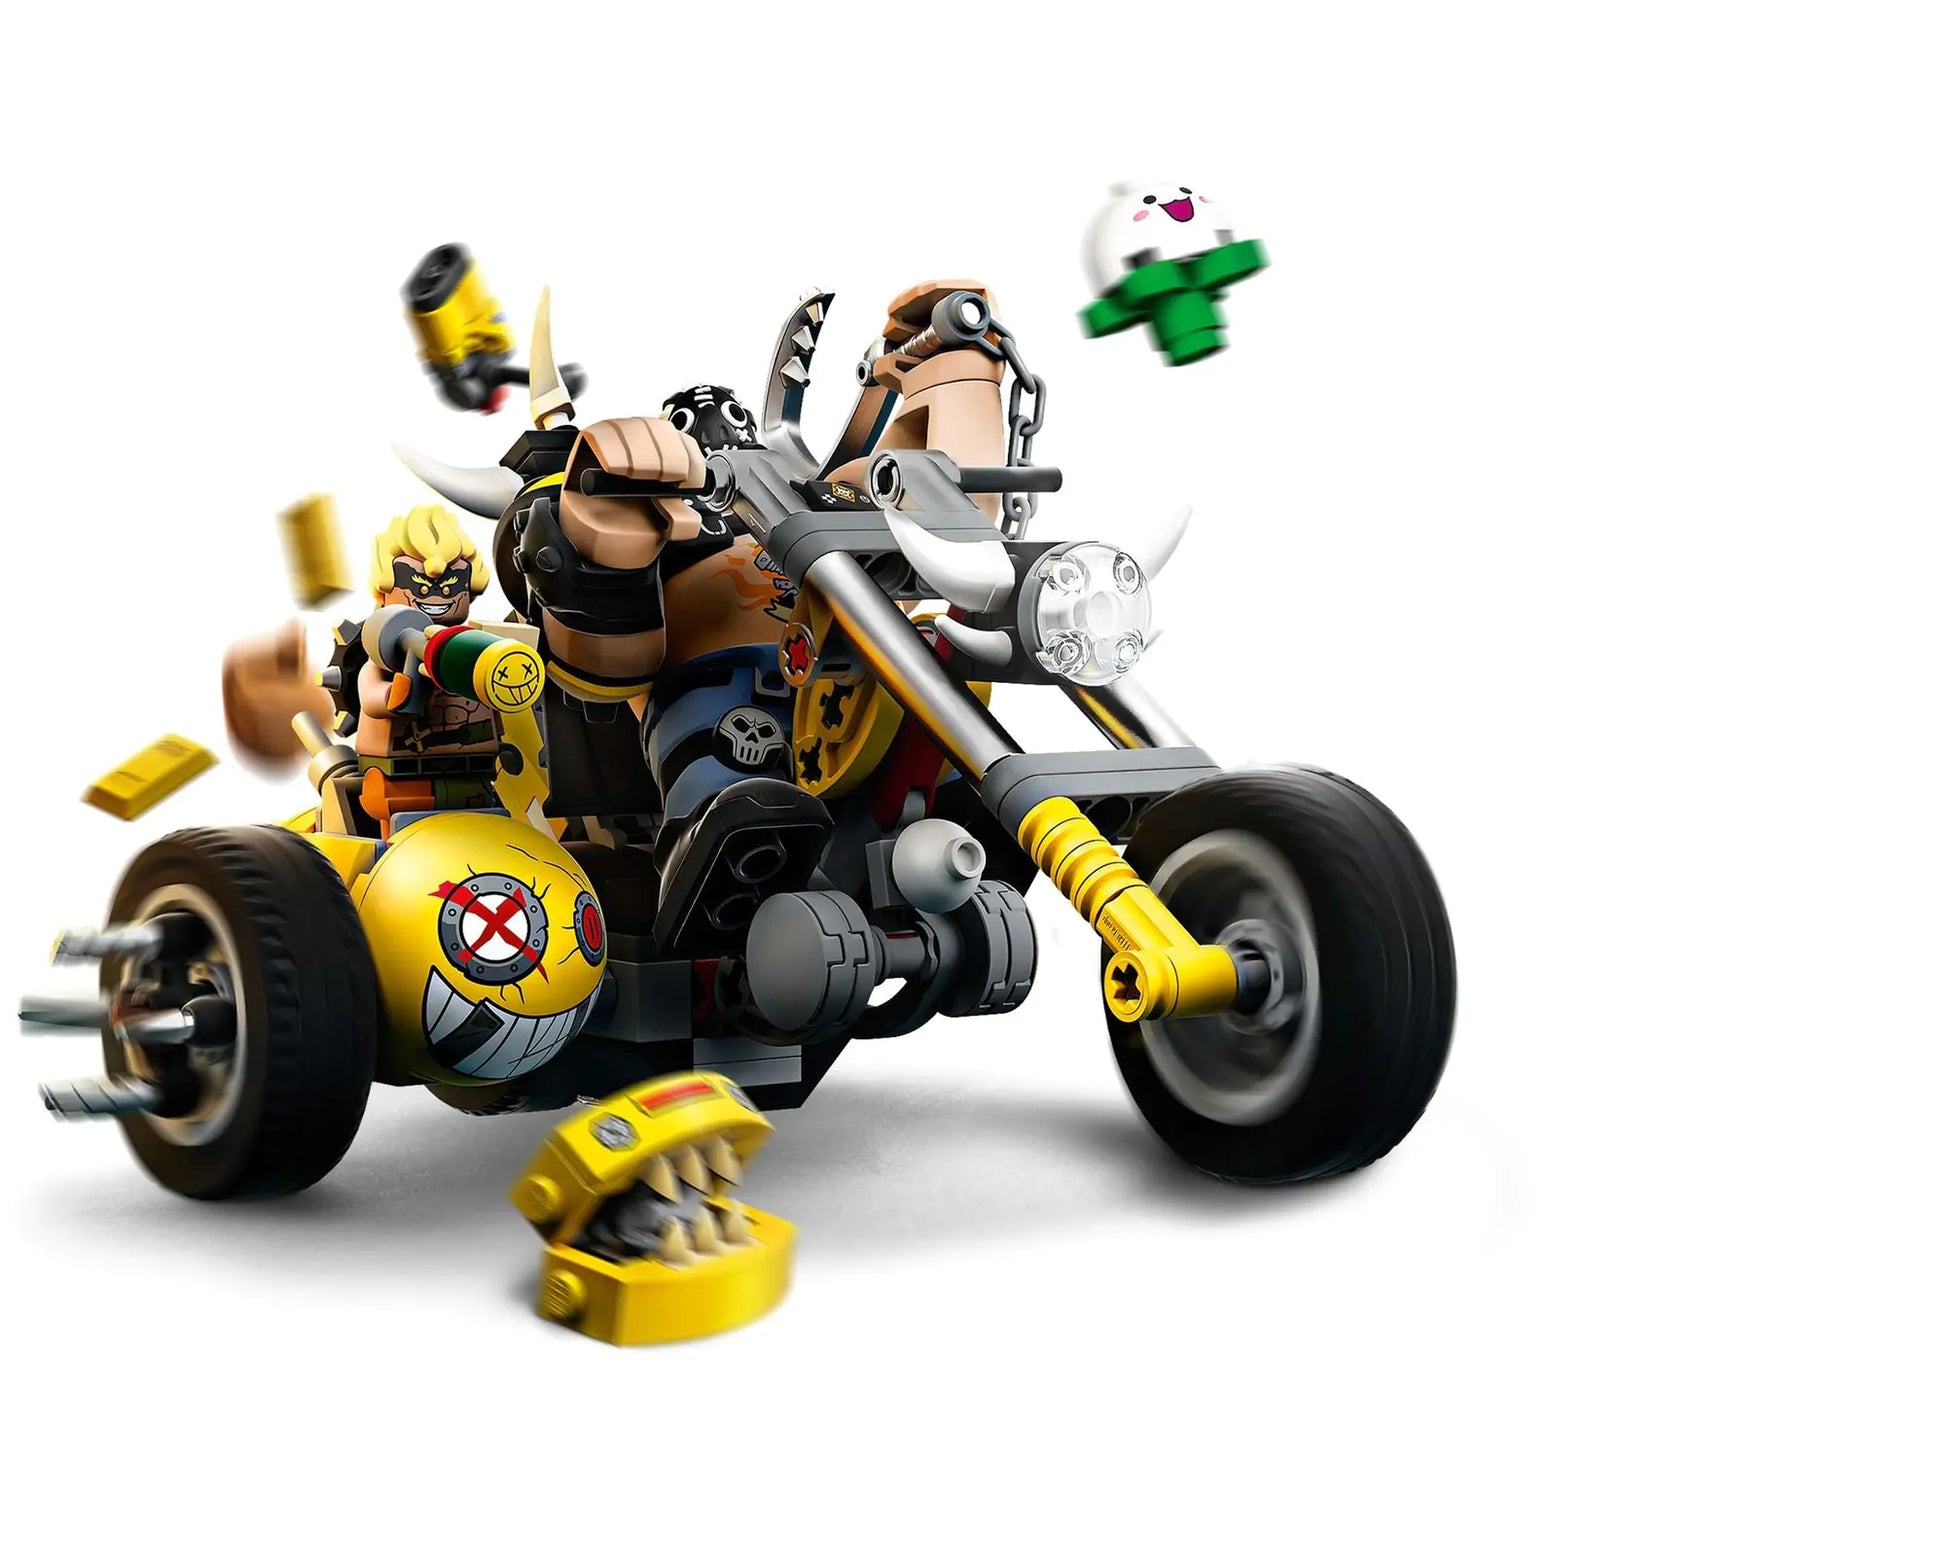 Overwatch Exclusive Set Junkrat and Roadhog- Limited quantity